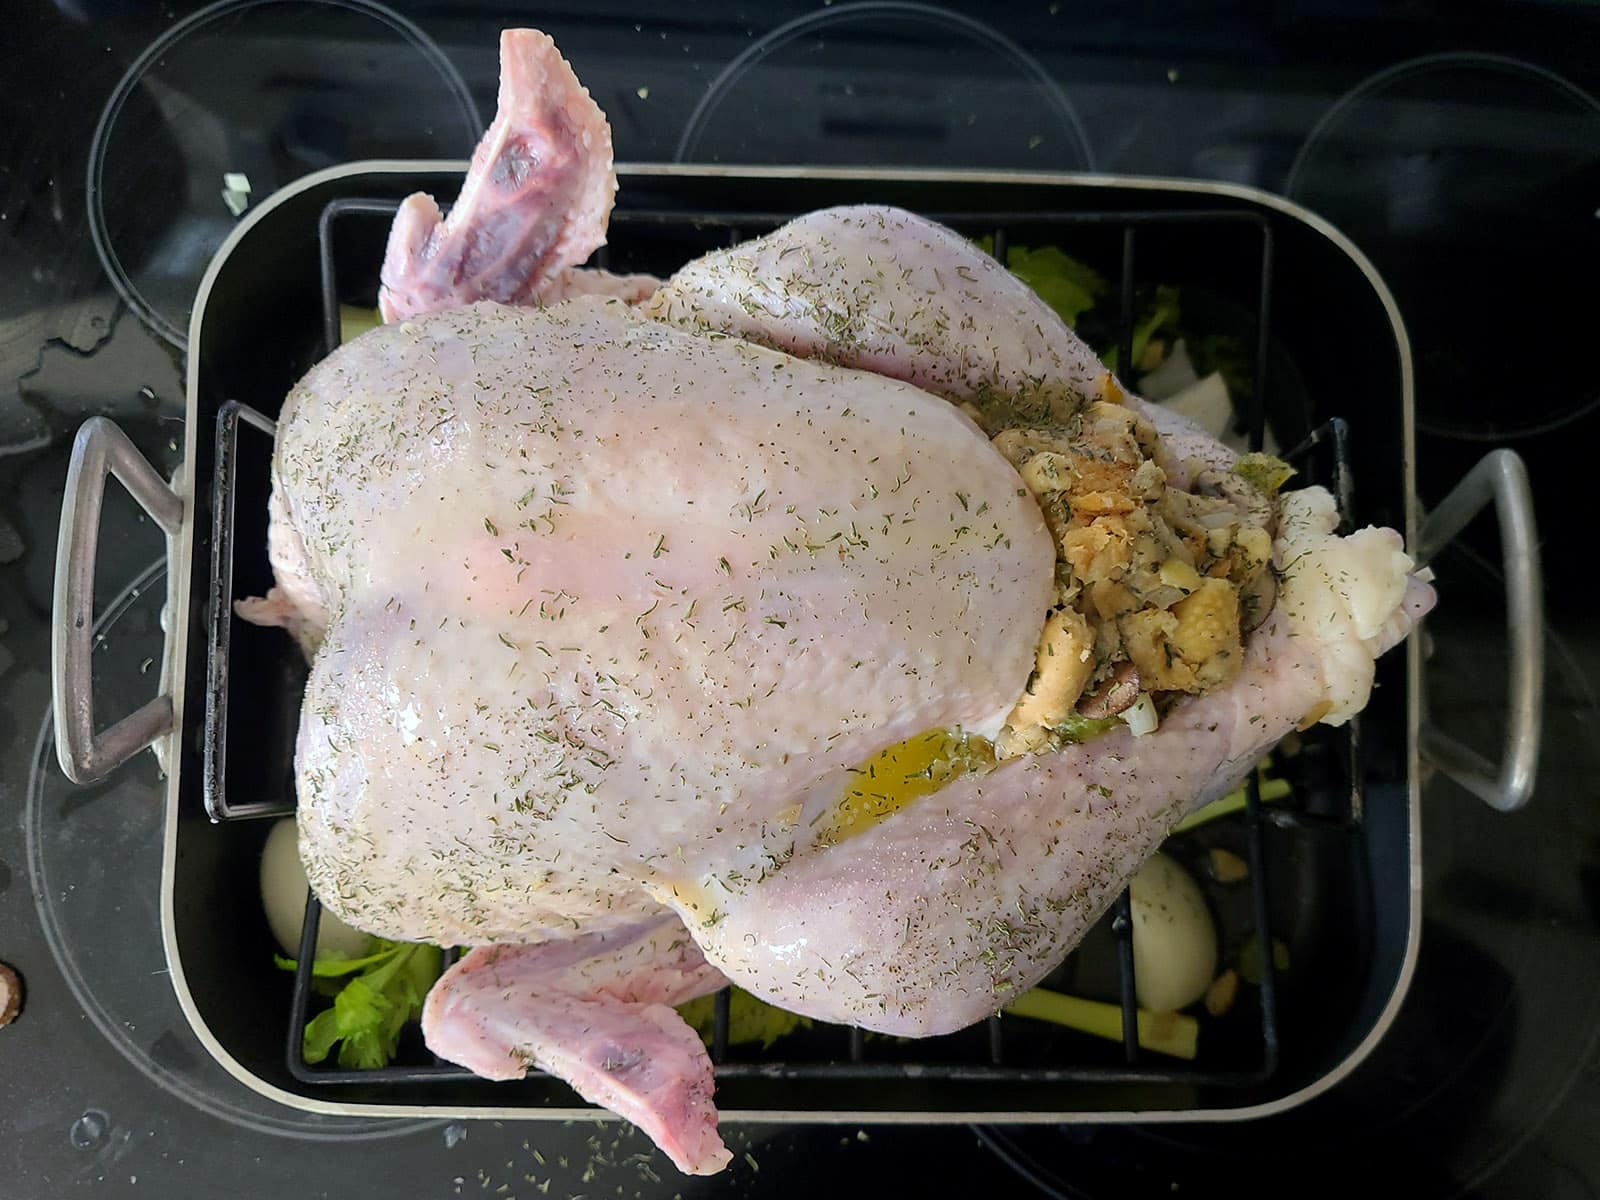 An overhead view of a stuffed roasted turkey before going in the oven.